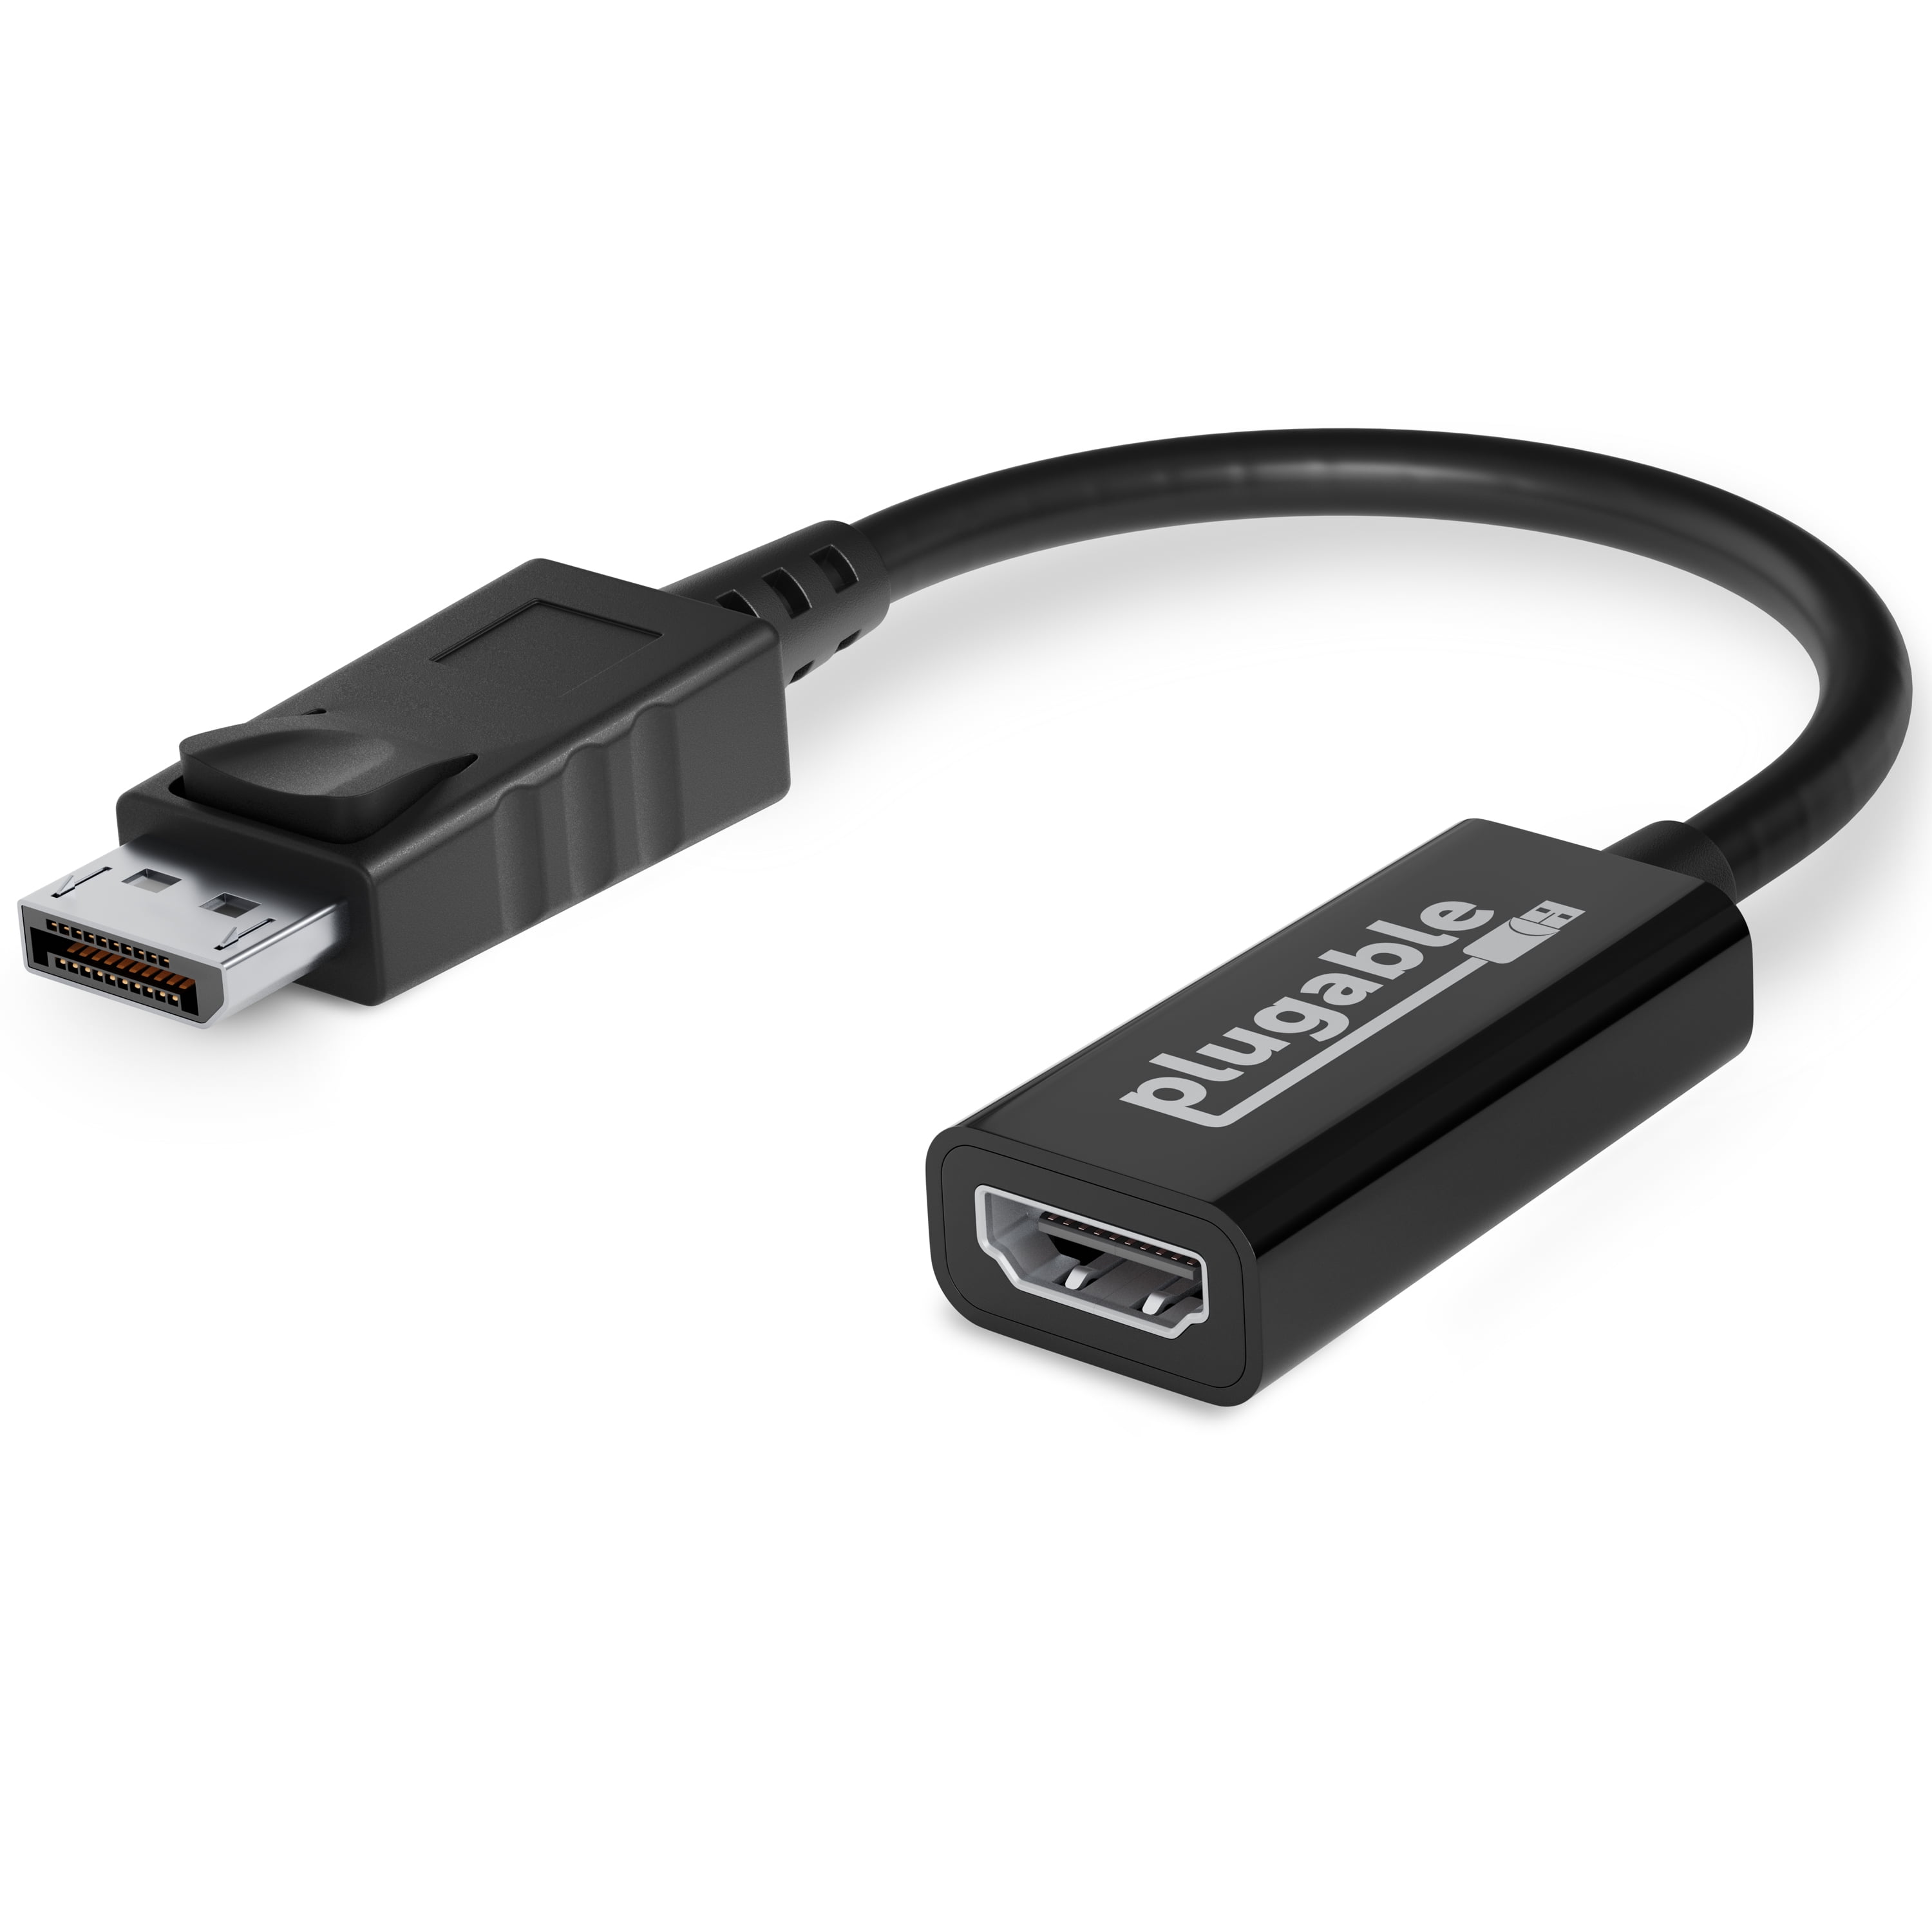 Converter Cable Supporting Up to 1920 x 1080 6 Foot 1.8 Meter Plugable HDMI to VGA Adapter 60Hz 